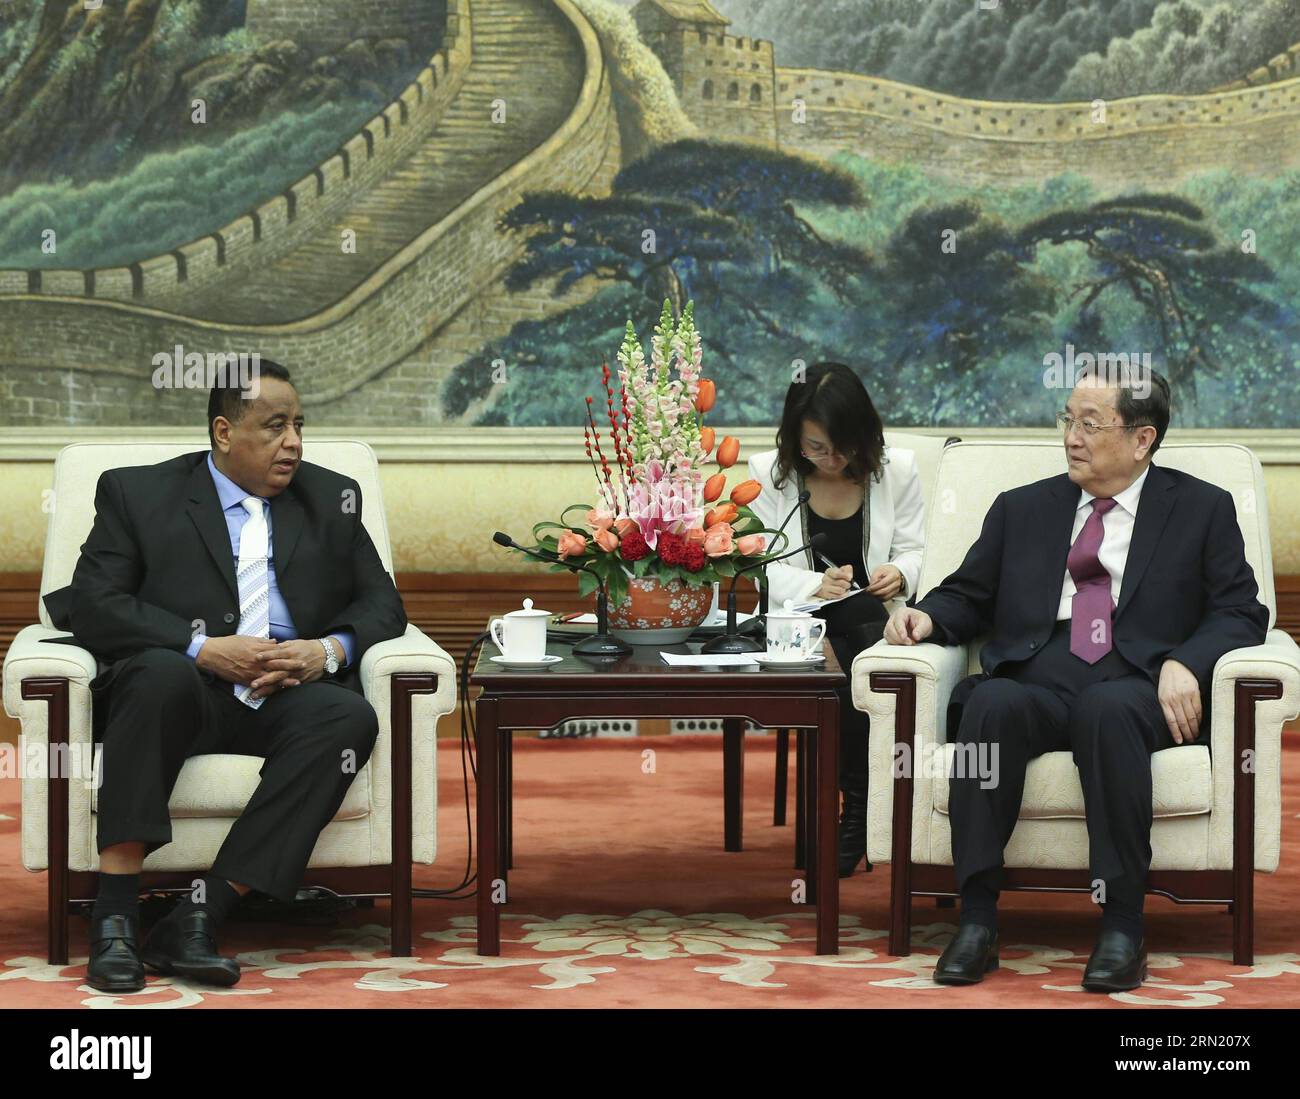 (150128) -- BEIJING, Jan. 28, 2015 -- Yu Zhengsheng(R), chairman of the National Committee of the Chinese People s Political Consultative Conference, meets with the deputy chairman of Sudan s ruling National Congress Party (NCP) Ibrahim Ghandour, who is also assistant to the Sudanese President Omar al-Bashir, in Beijing, capital of China, Jan. 28, 2015. Ghandour is visiting China to attend the third high-level dialogue between the Communist Party of China and the Sudan s National Congress Party (NCP). ) (yxb) CHINA-BEIJING-YU ZHENGSHENG-SUDAN-MEETING(CN) DingxLin PUBLICATIONxNOTxINxCHN   Beiji Stock Photo